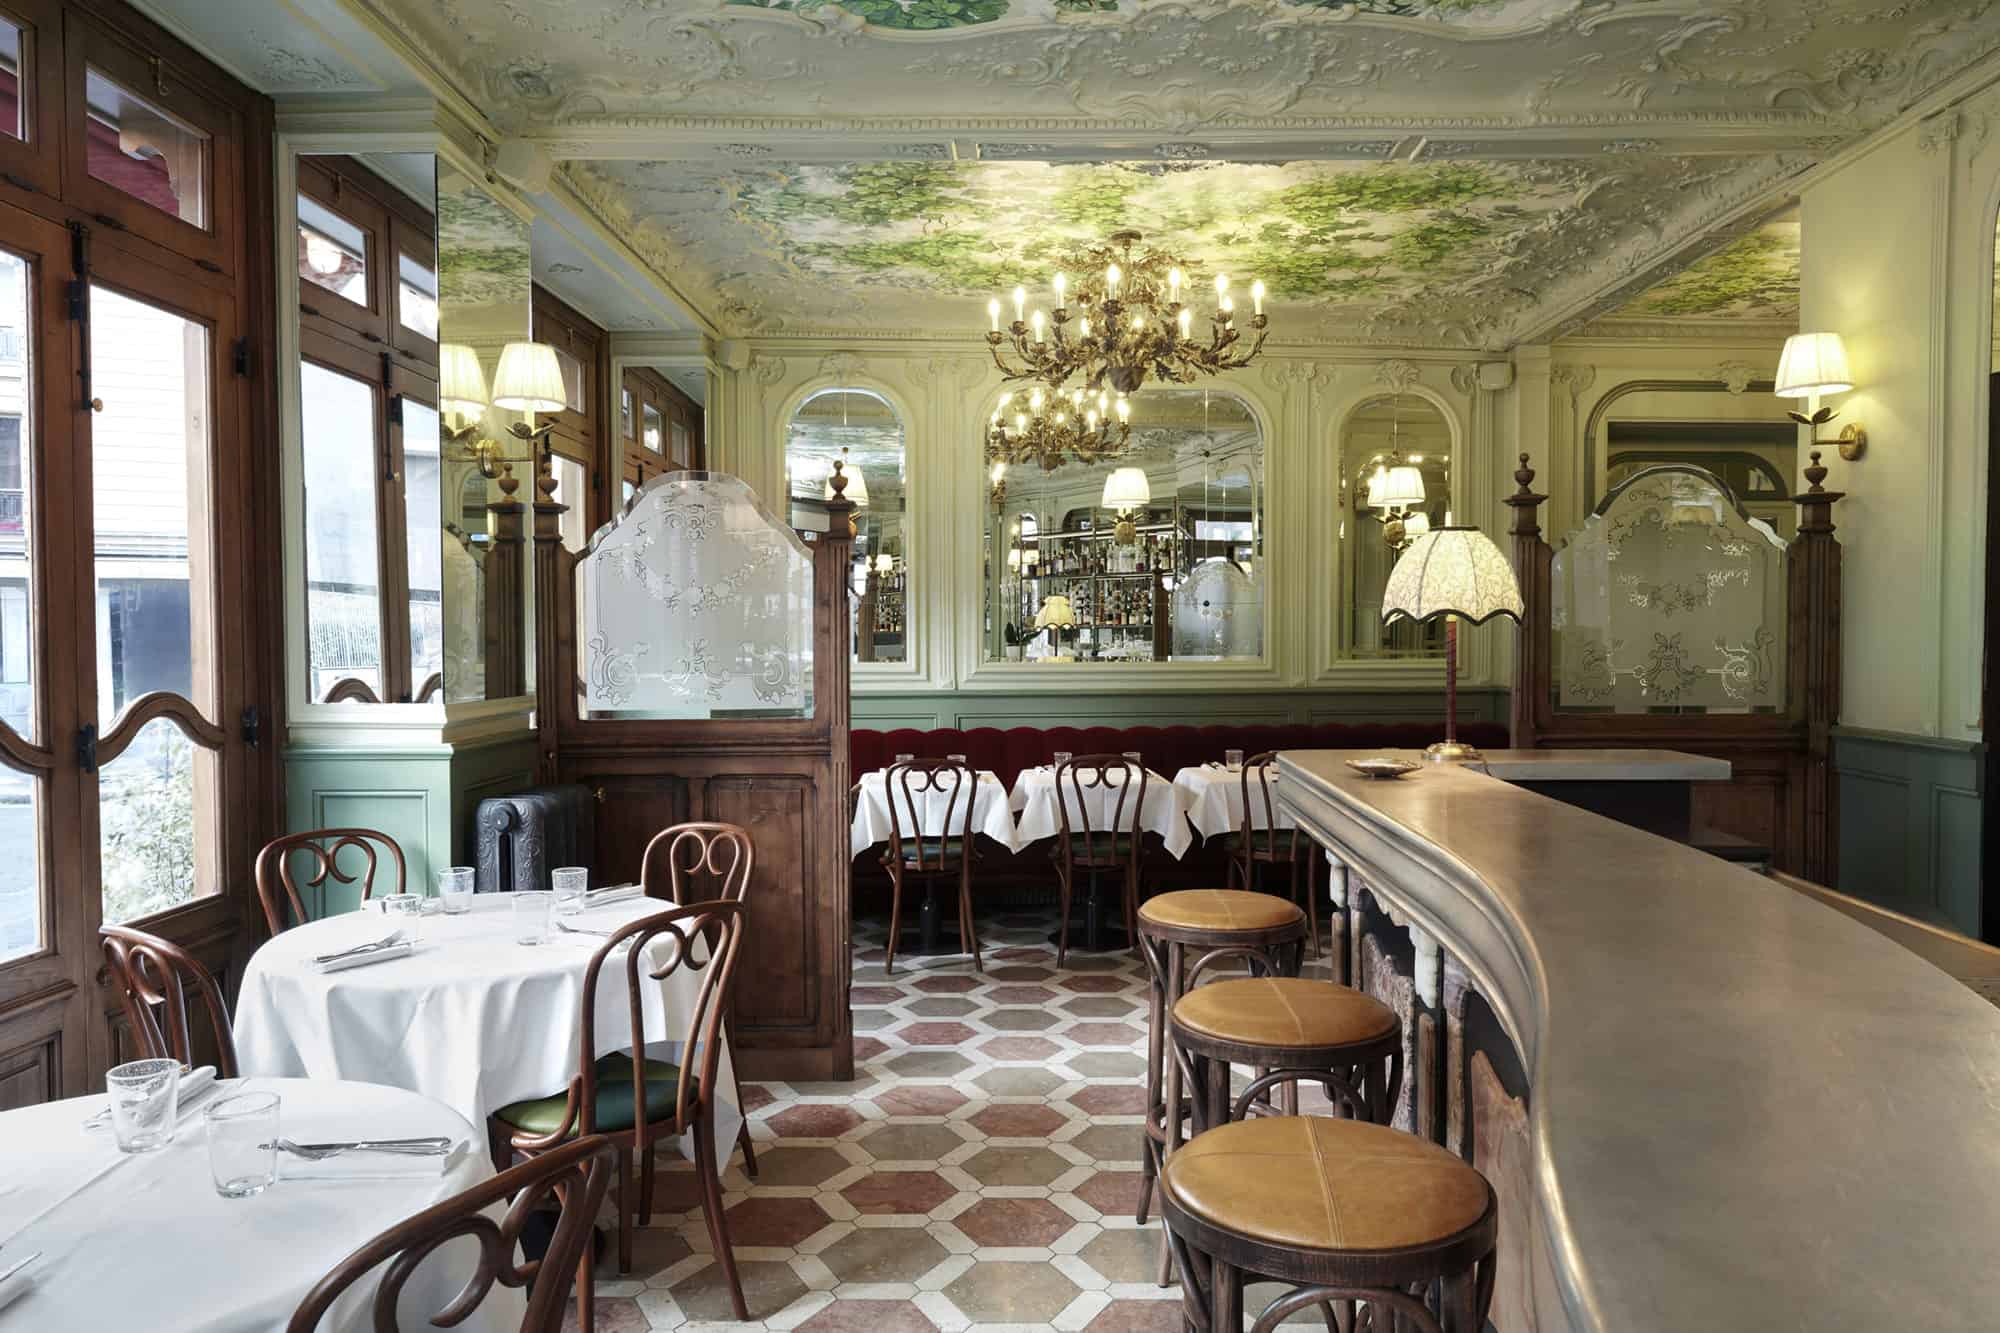 Le Chardenoux Paris bistrot Art Nouveau interiors with wooden tables, white table cloths and beautiful ceiling frescoes.